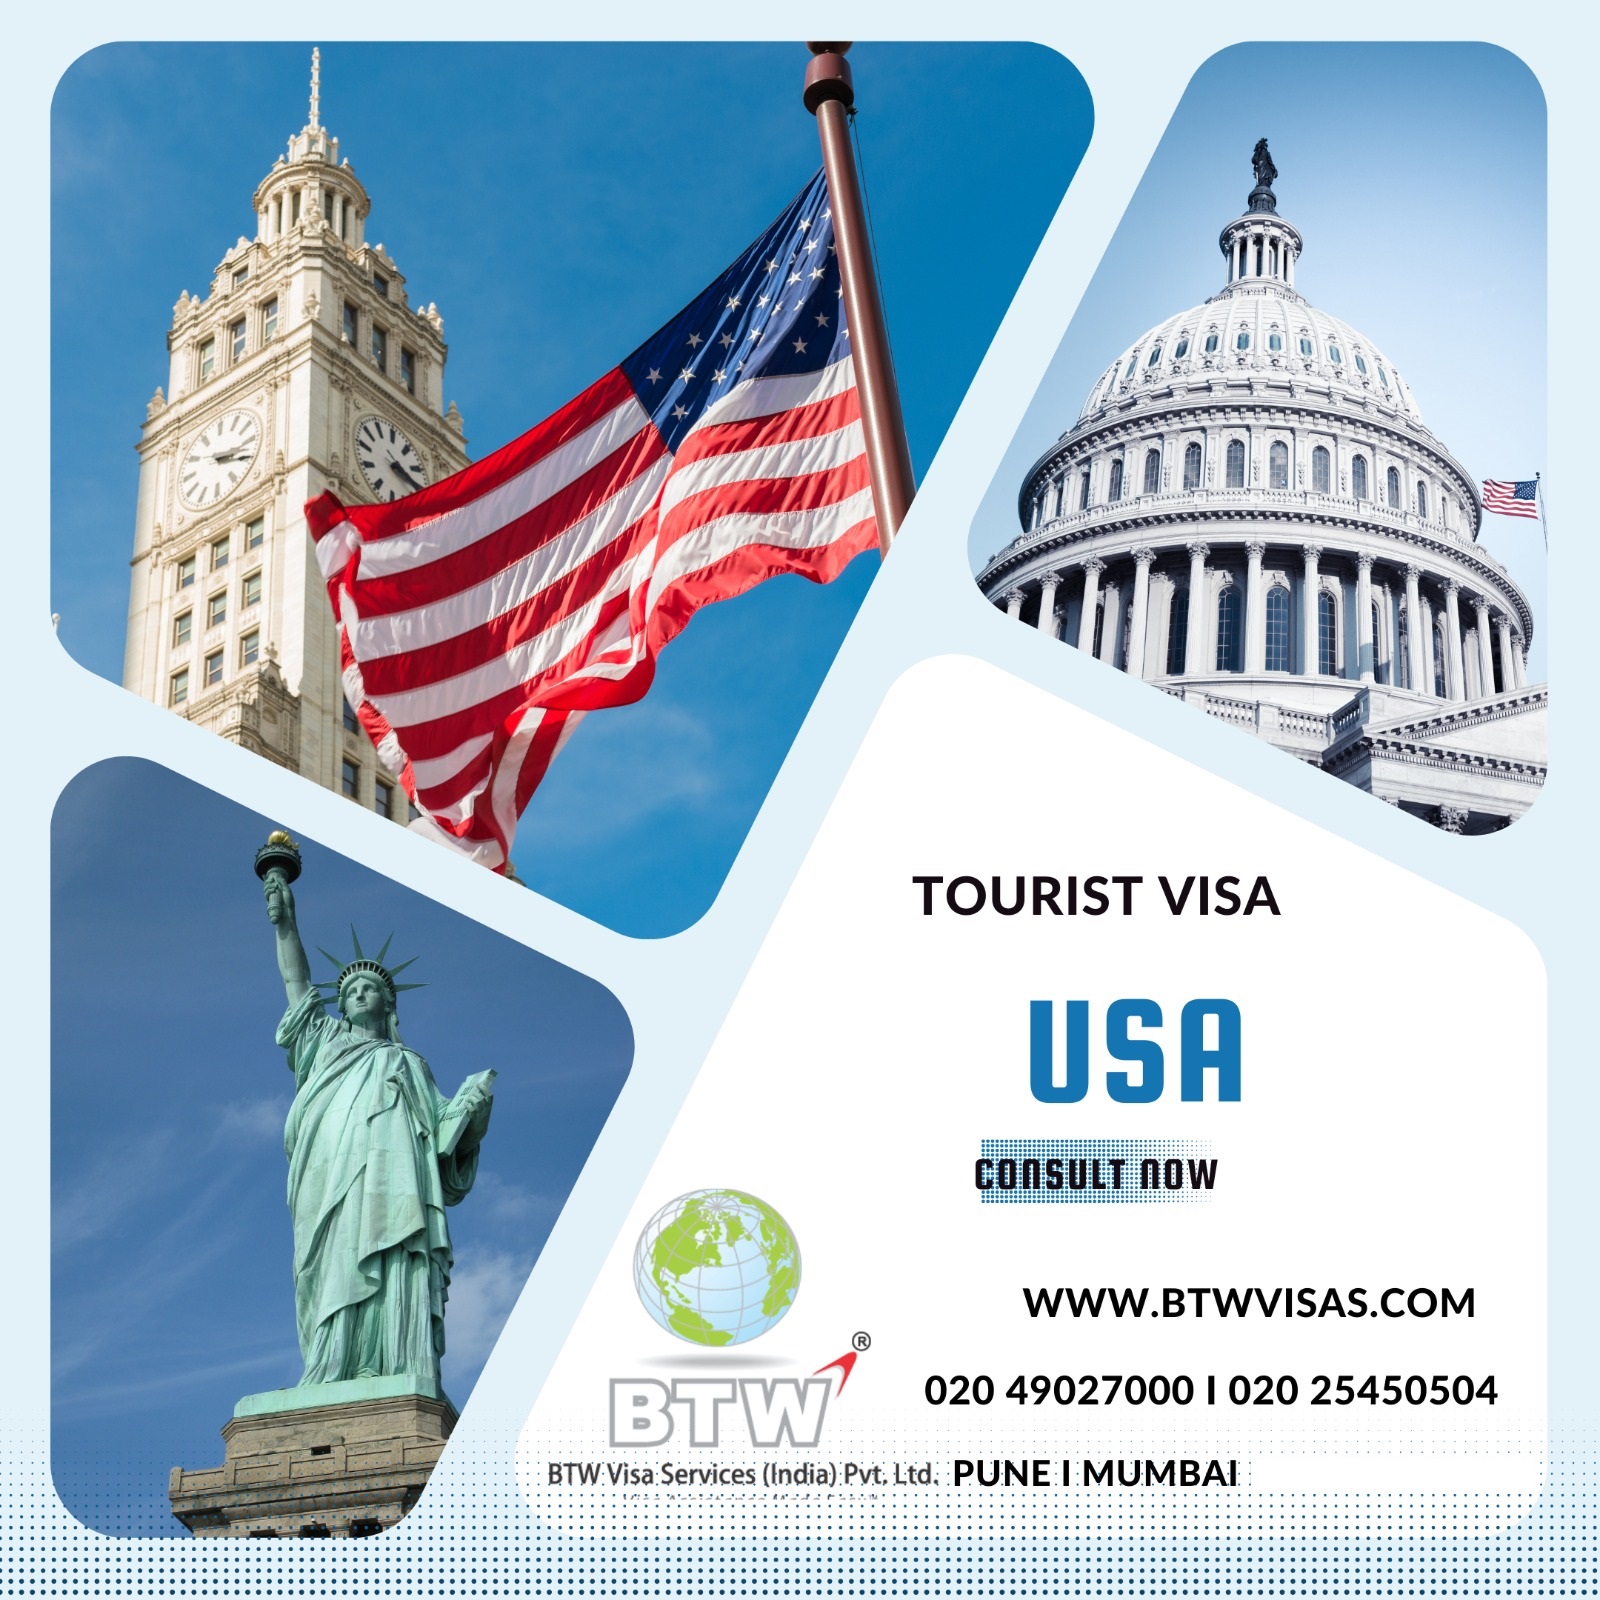 BTW Visa Services (India) Pvt Ltd-Visa Agent in Thane,Thane,Services,Free Classifieds,Post Free Ads,77traders.com